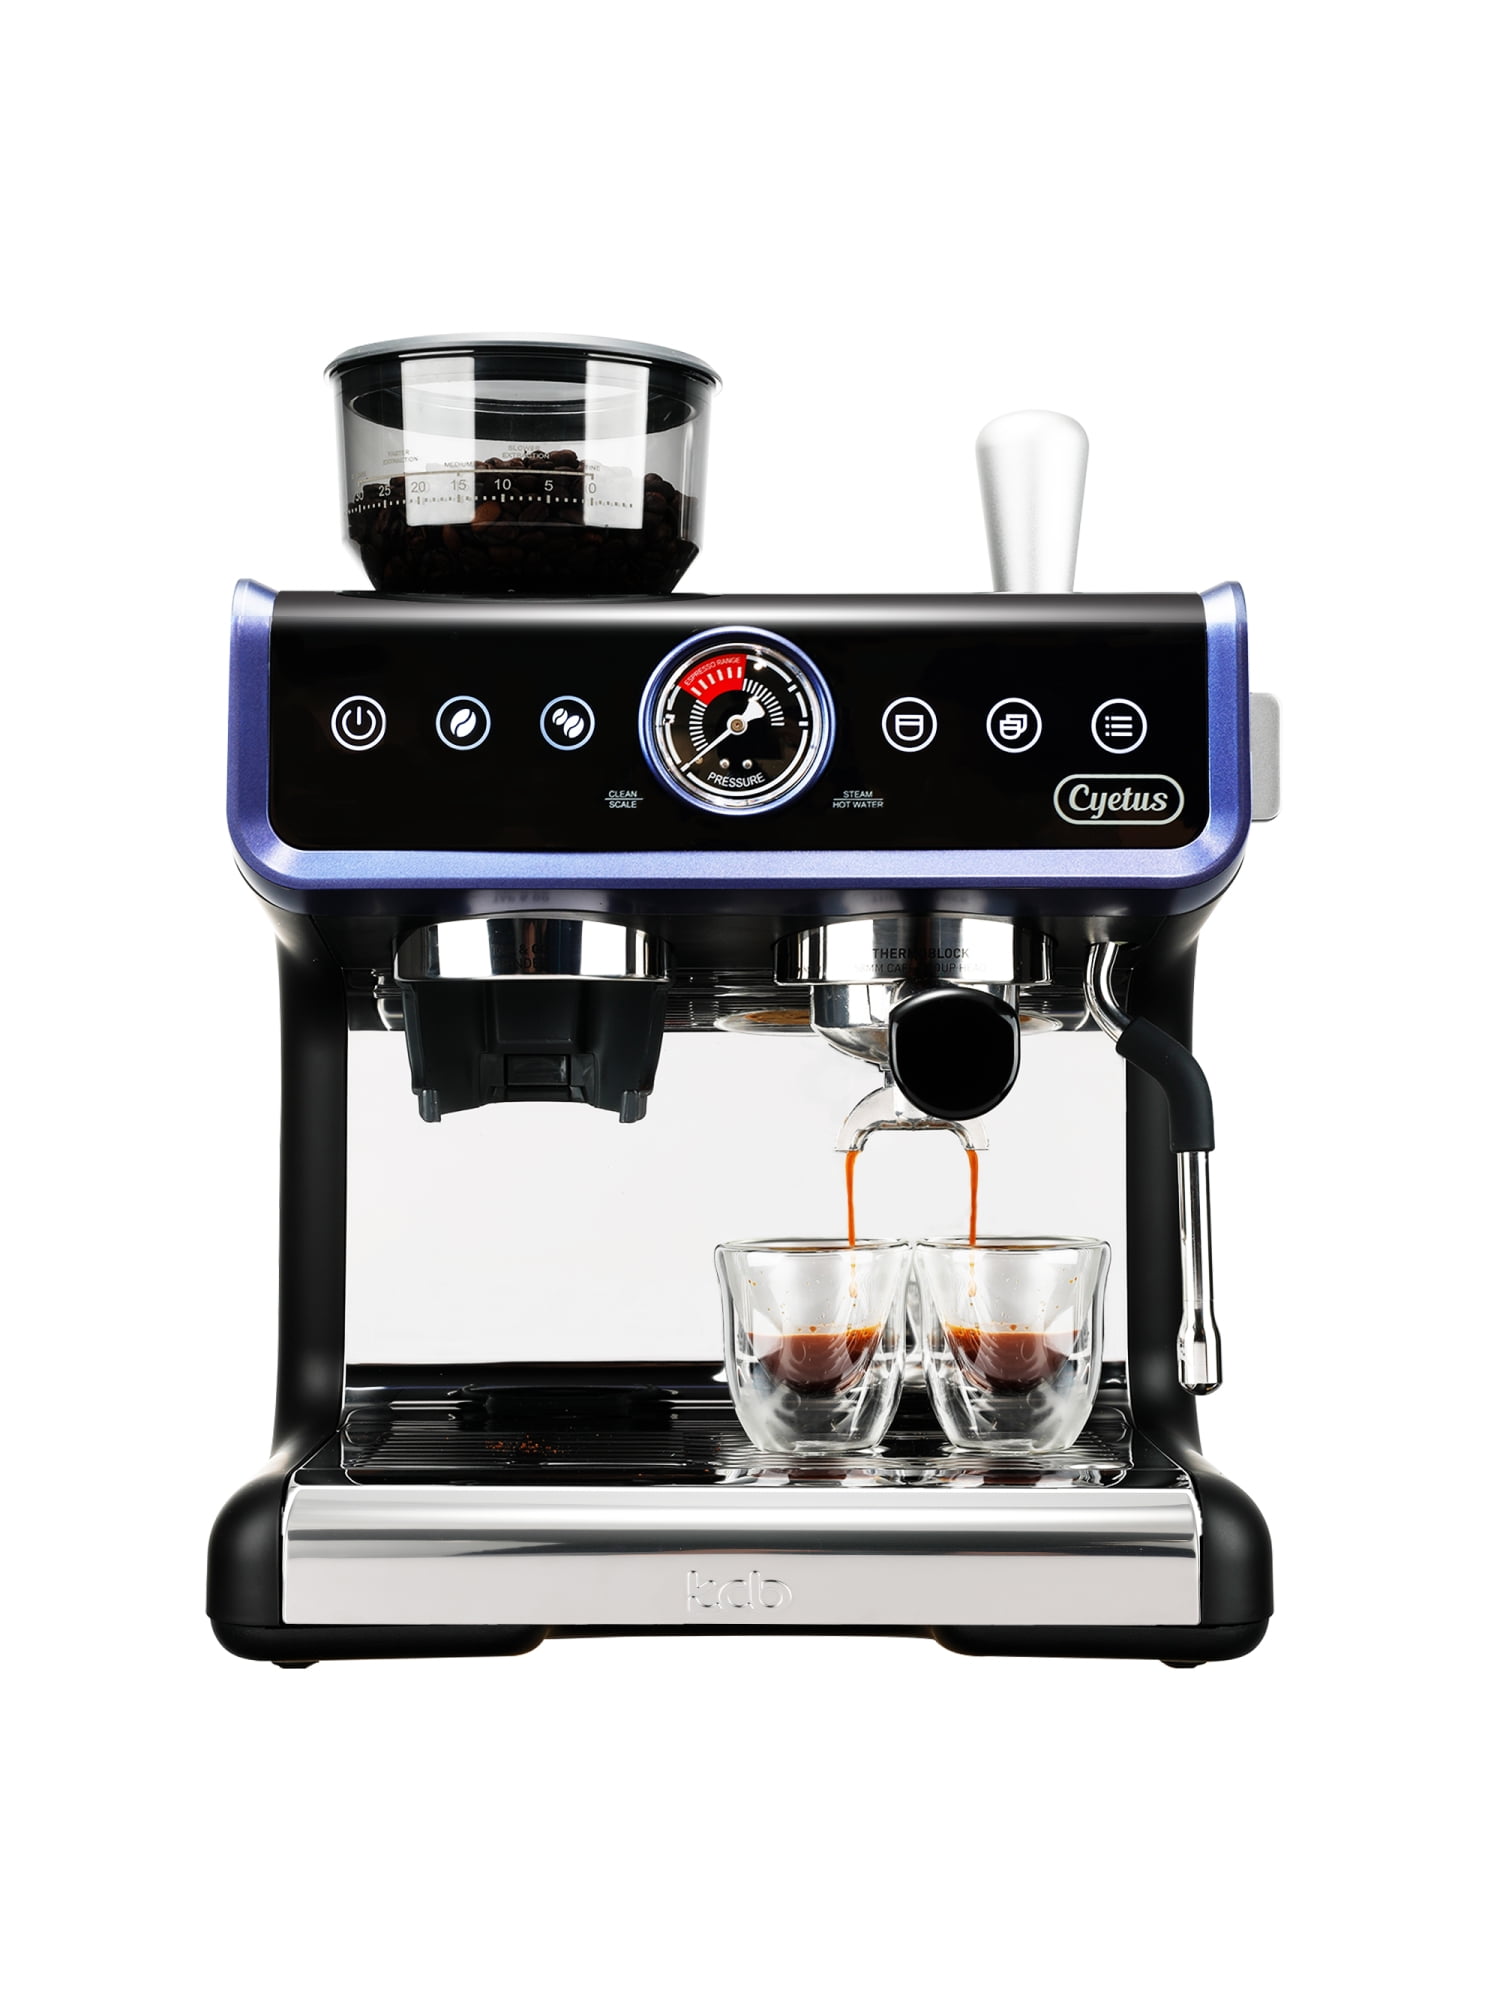 Cyetus All in One Espresso Machine for Home Barista with Coffee Grinder and Milk Steam Wand for Espresso, Cappuccino, and Latte